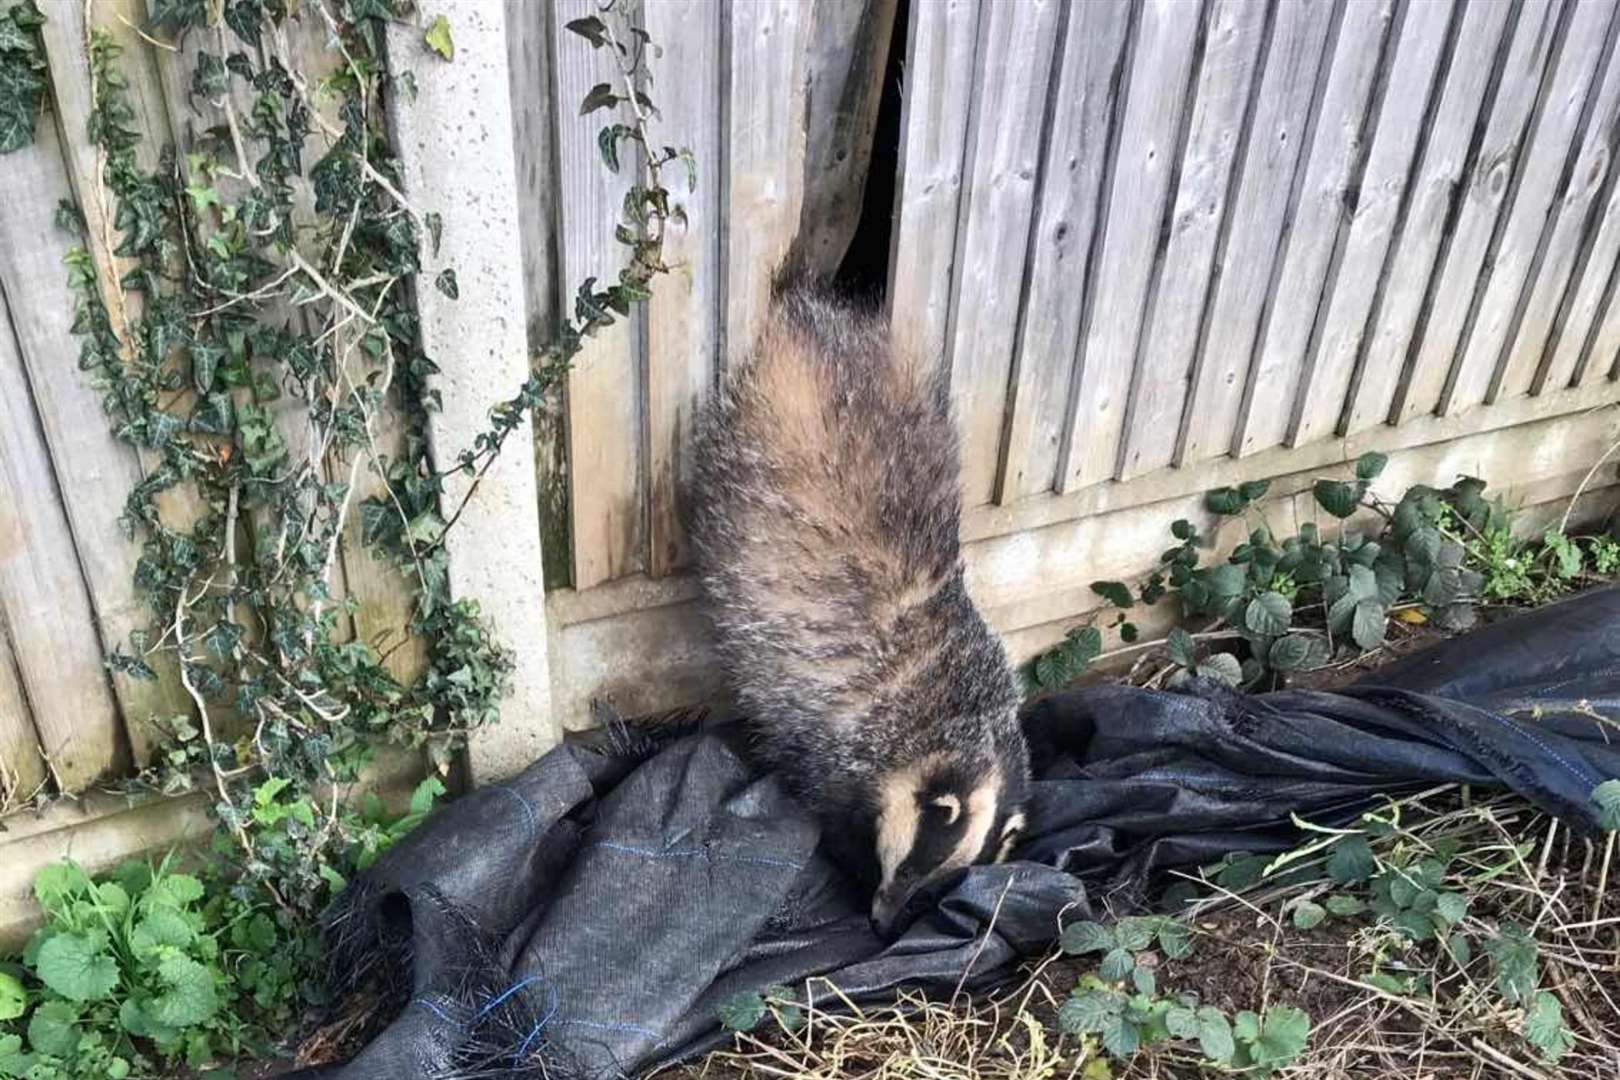 This badger had to be rescued. Photo: RSPCA